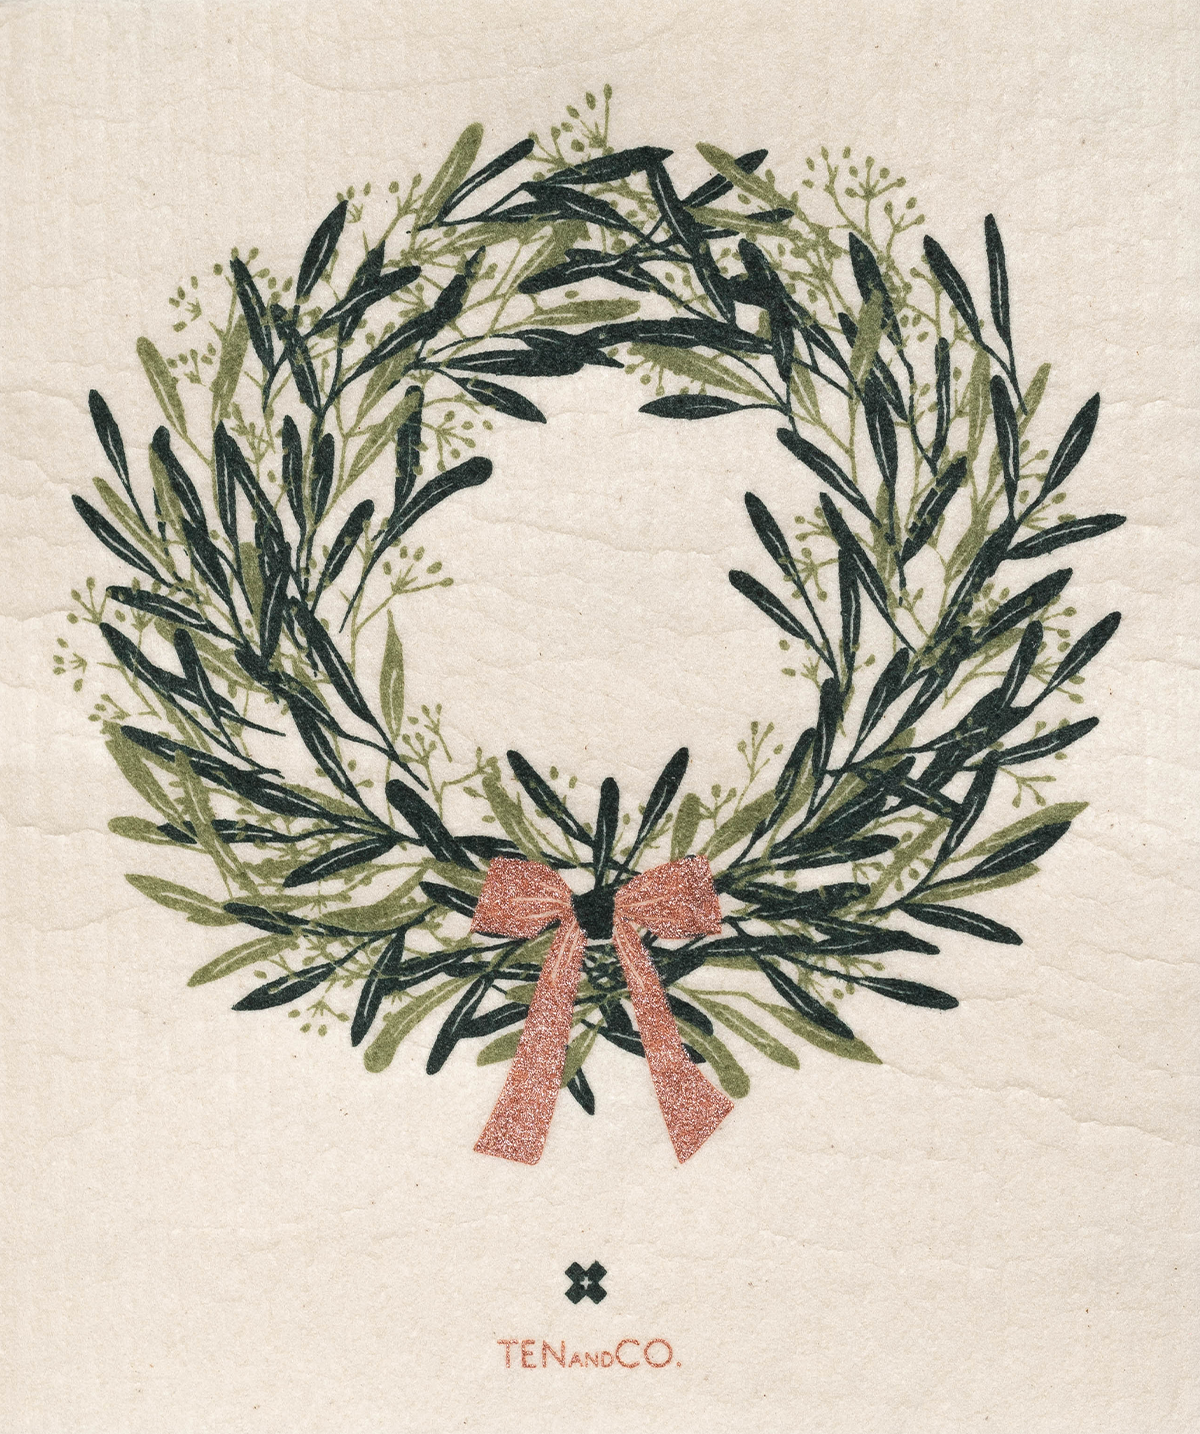 Dark green and olive green rosemary branches formed into a holiday wreath with a shimmery red bow at the bottom of the wreath.